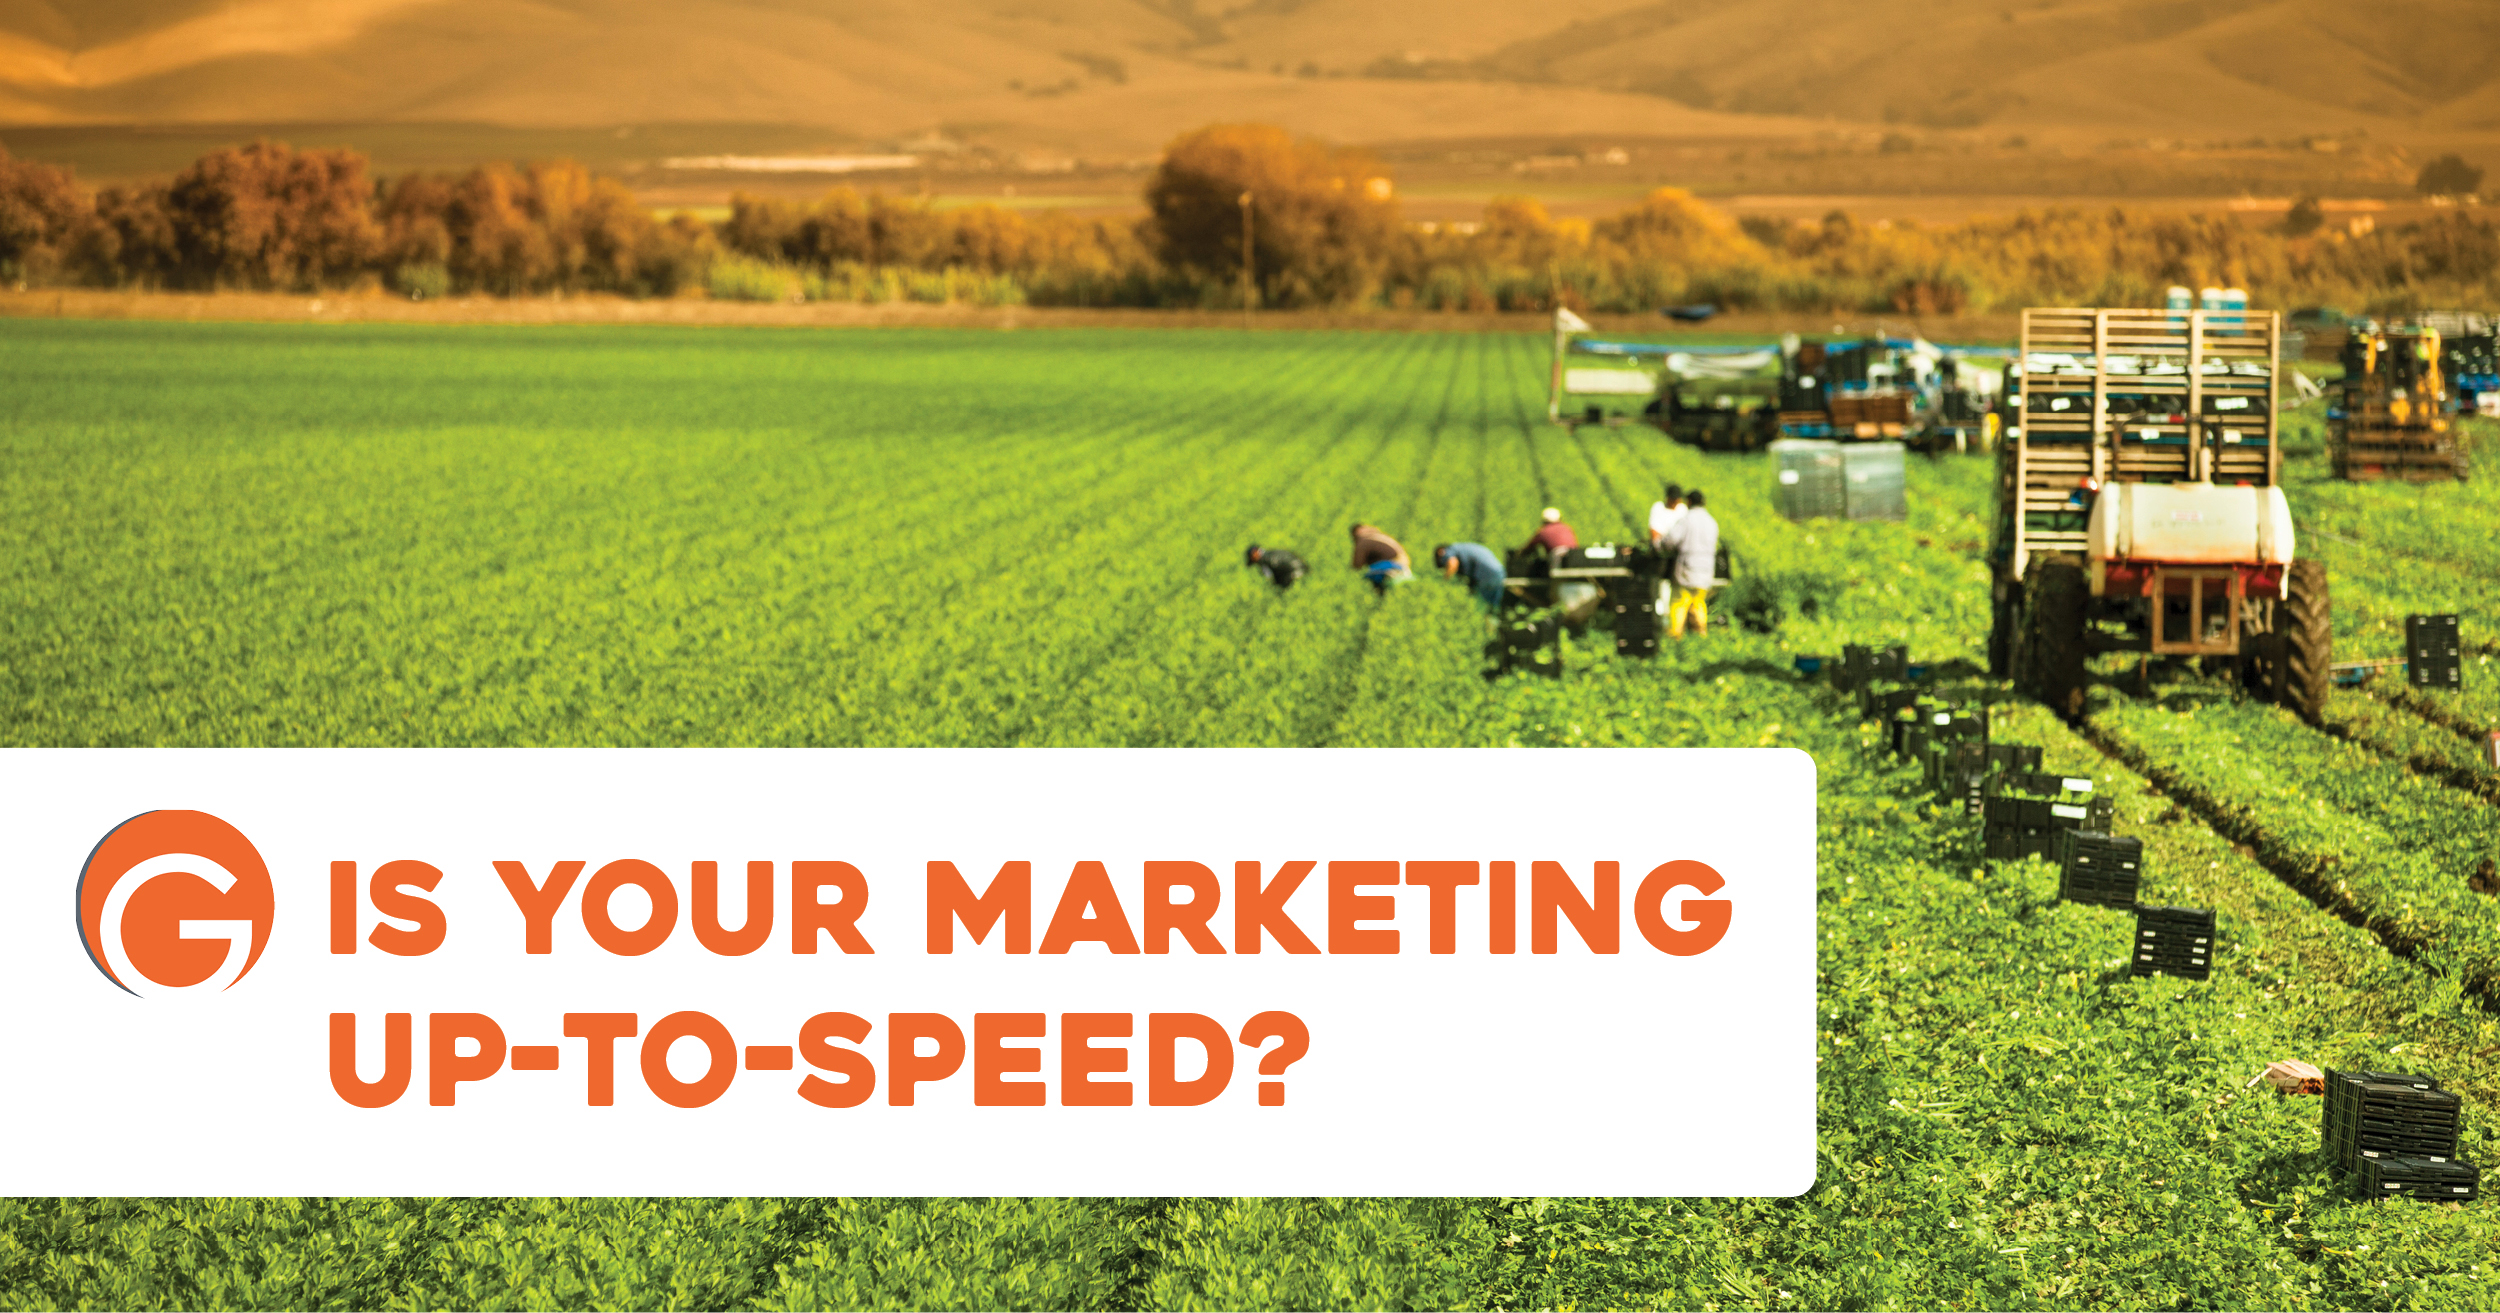 Is your marketing up-to-speed?